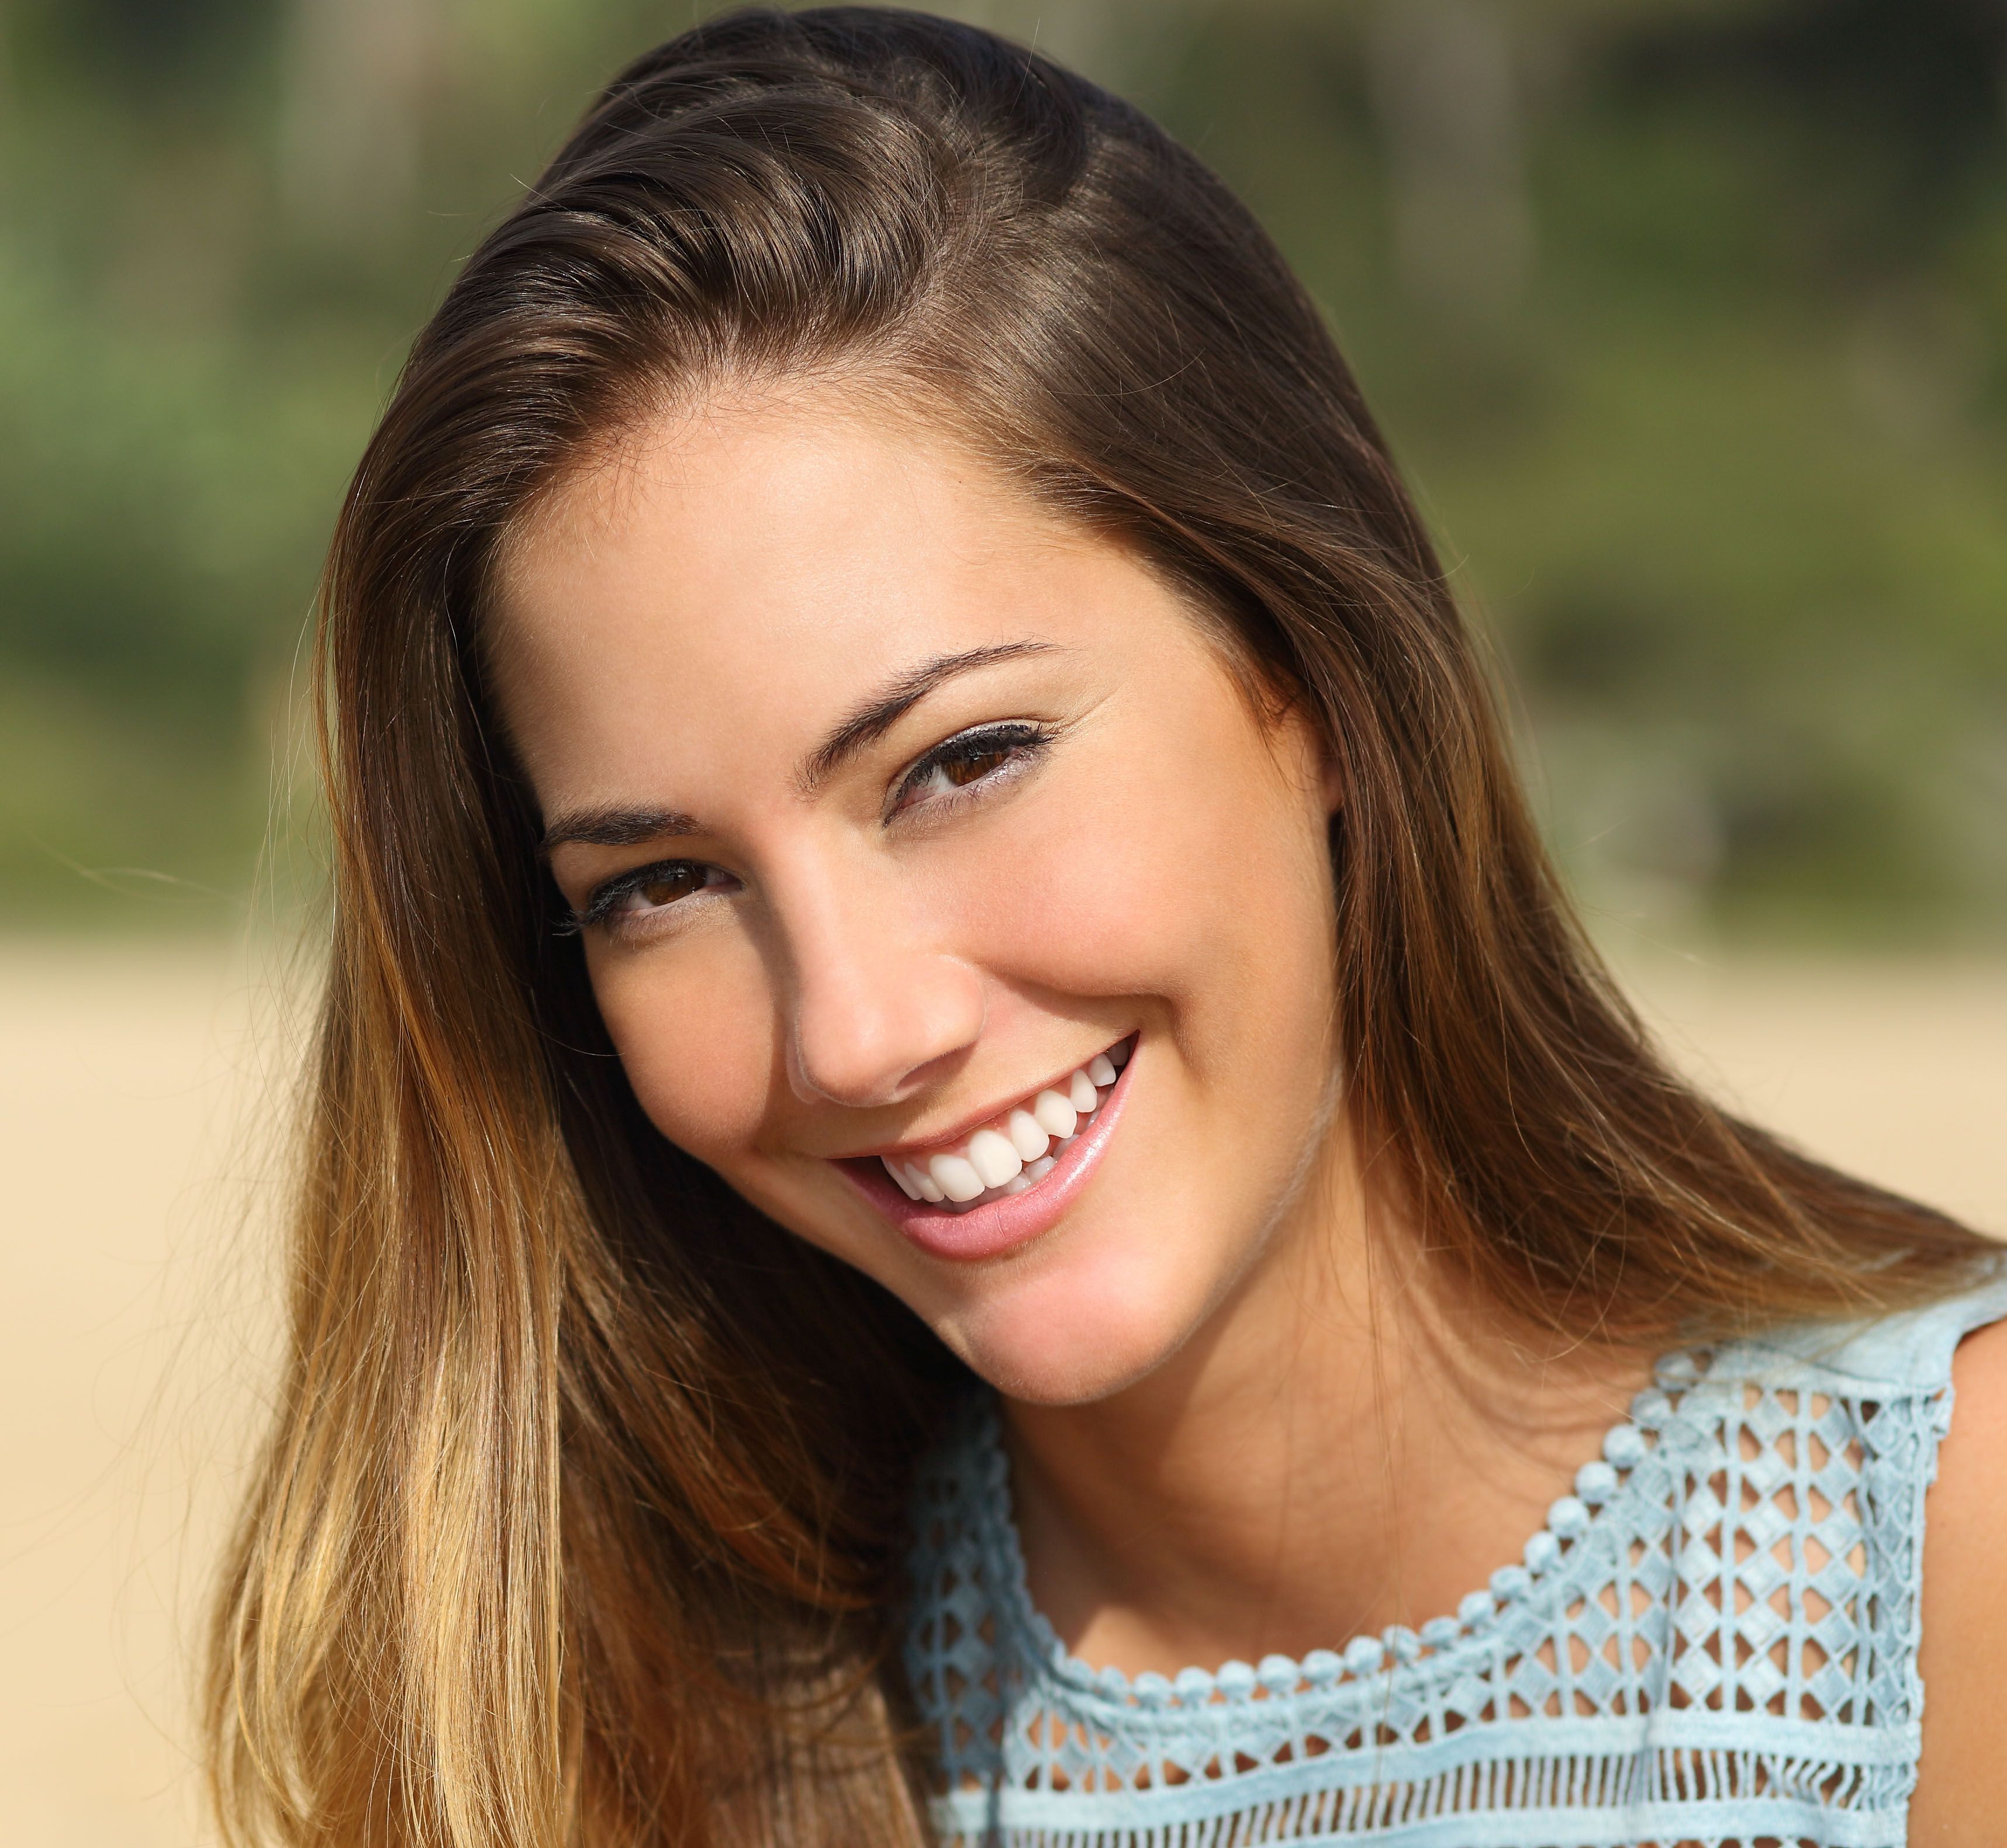 Portrait of a woman with a white teeth and perfect smile outdoors